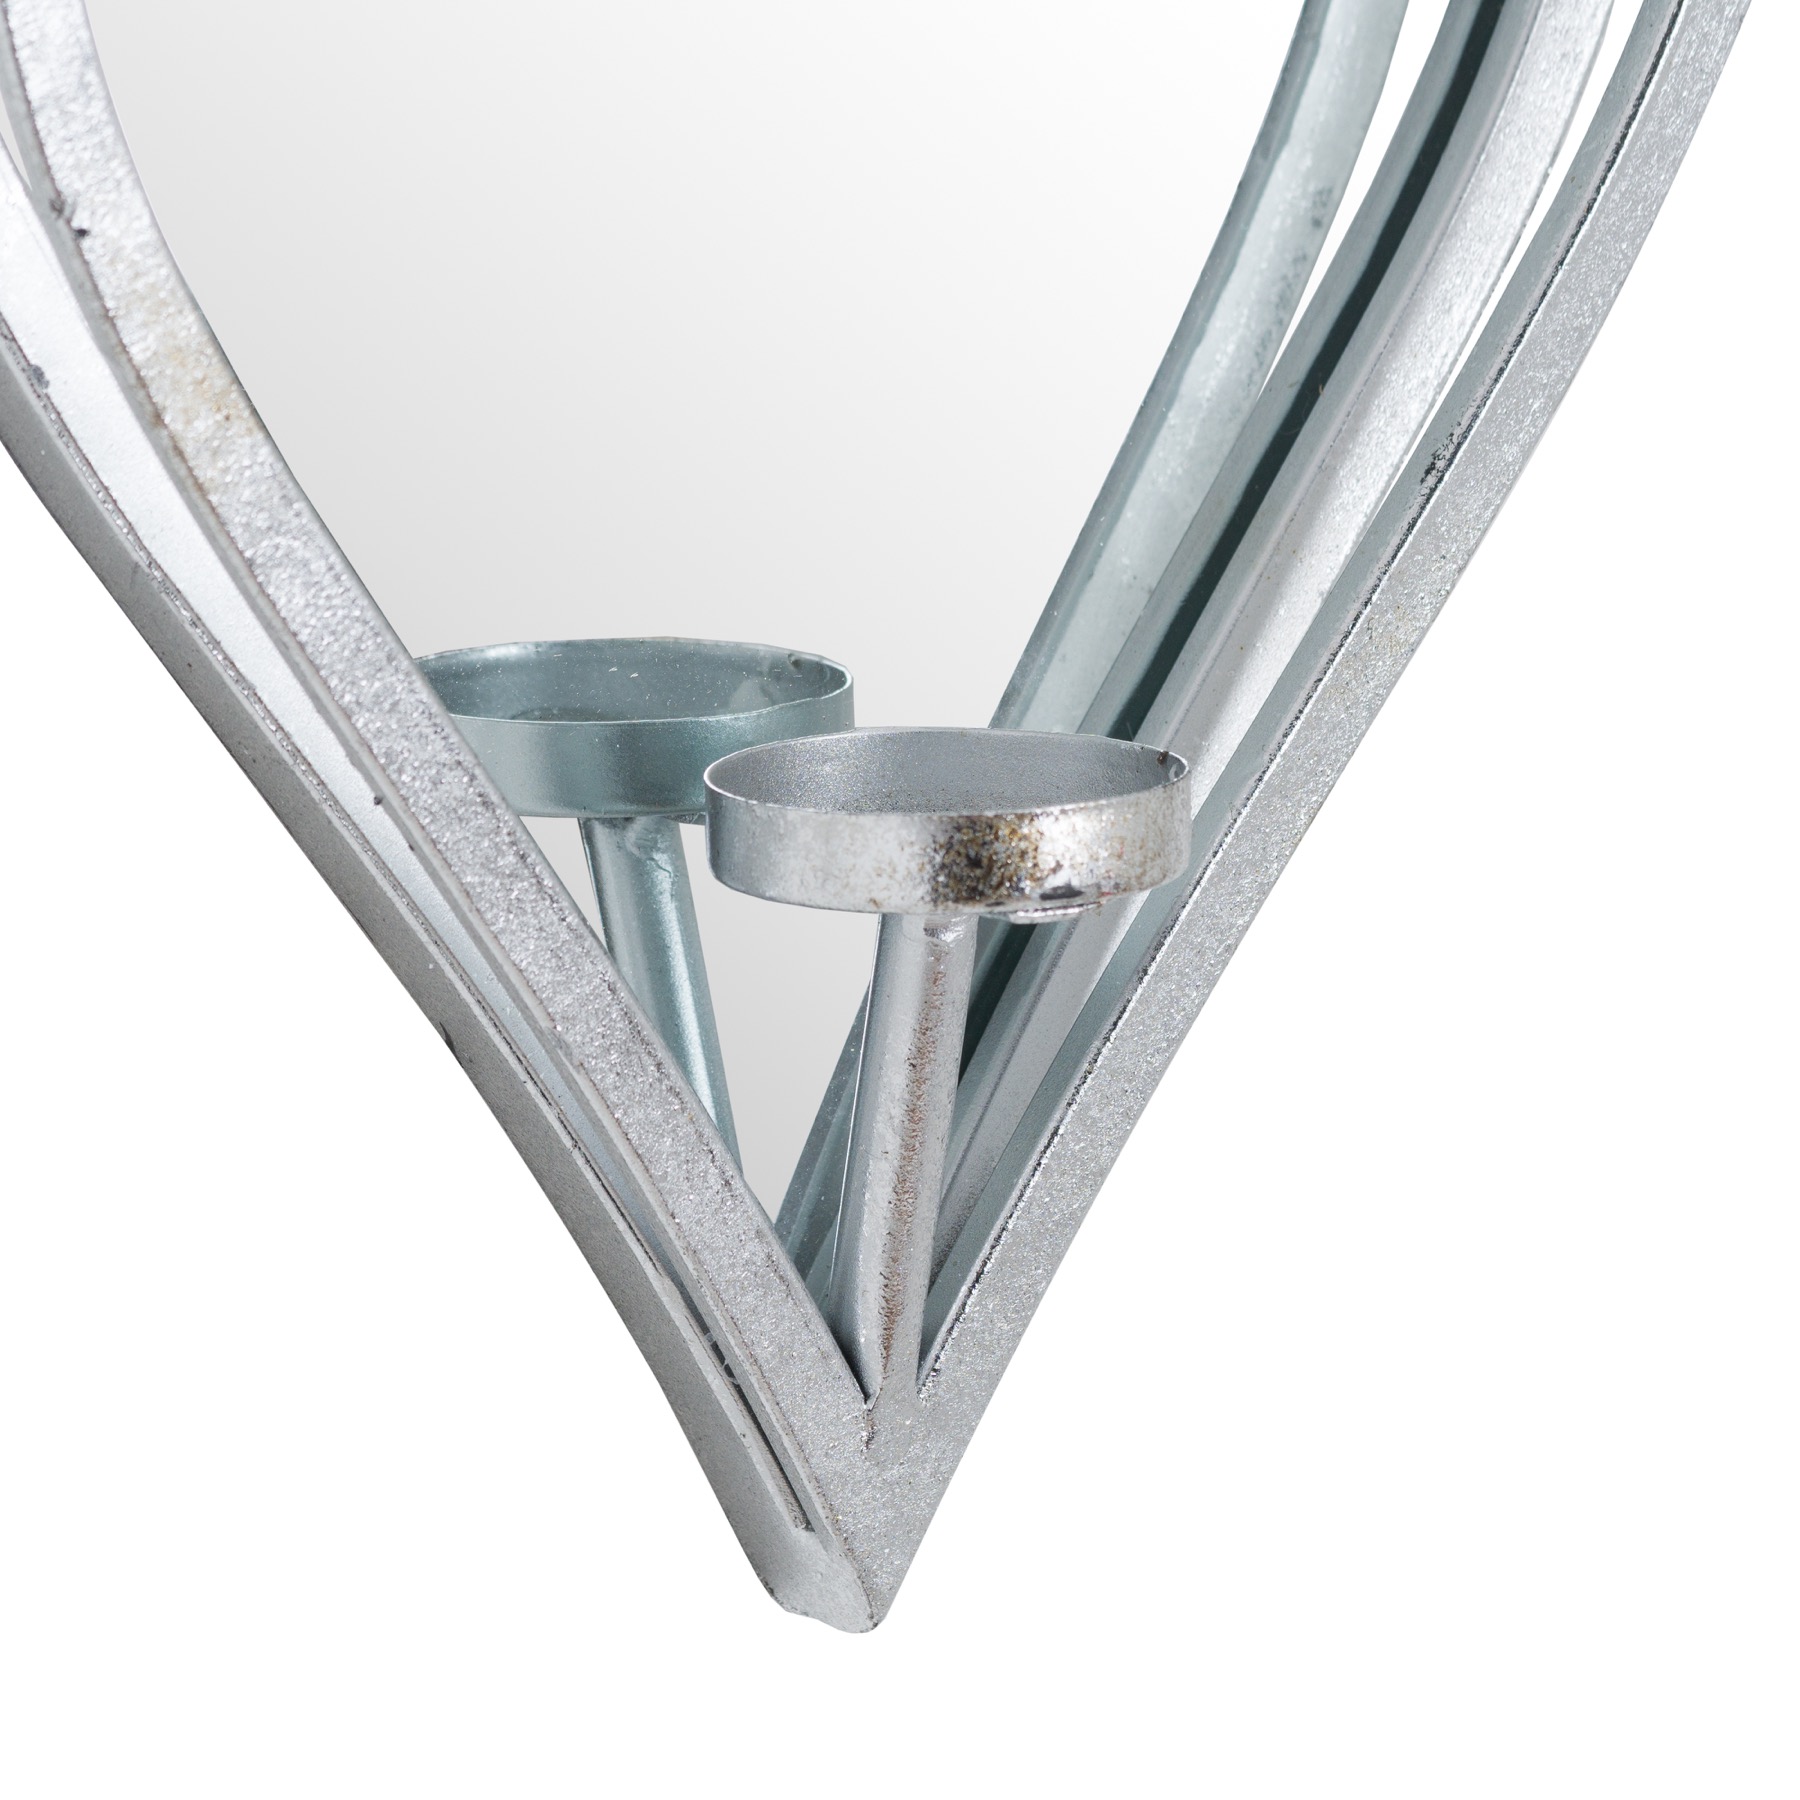 Small Silver Mirrored Heart Candle Holder - Image 2